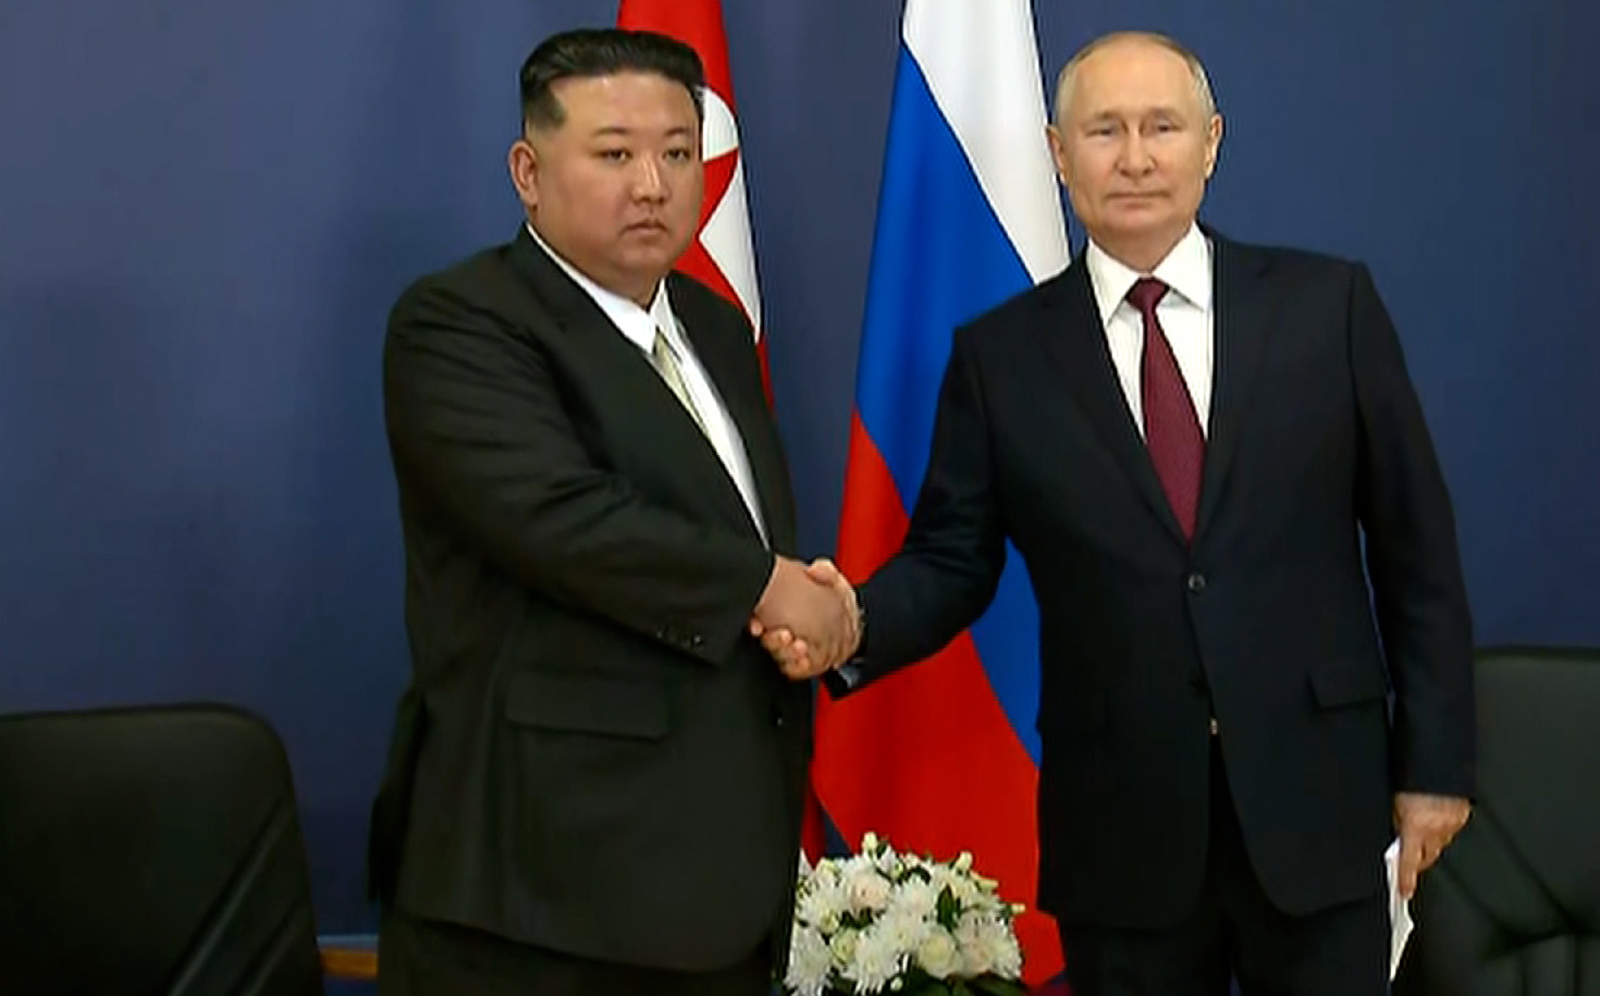 Kim Jong Un and Vladimir Putin shake hands as they begin their talks at the Vostochny Cosmodrome, Amur region, Russia, on September 13.